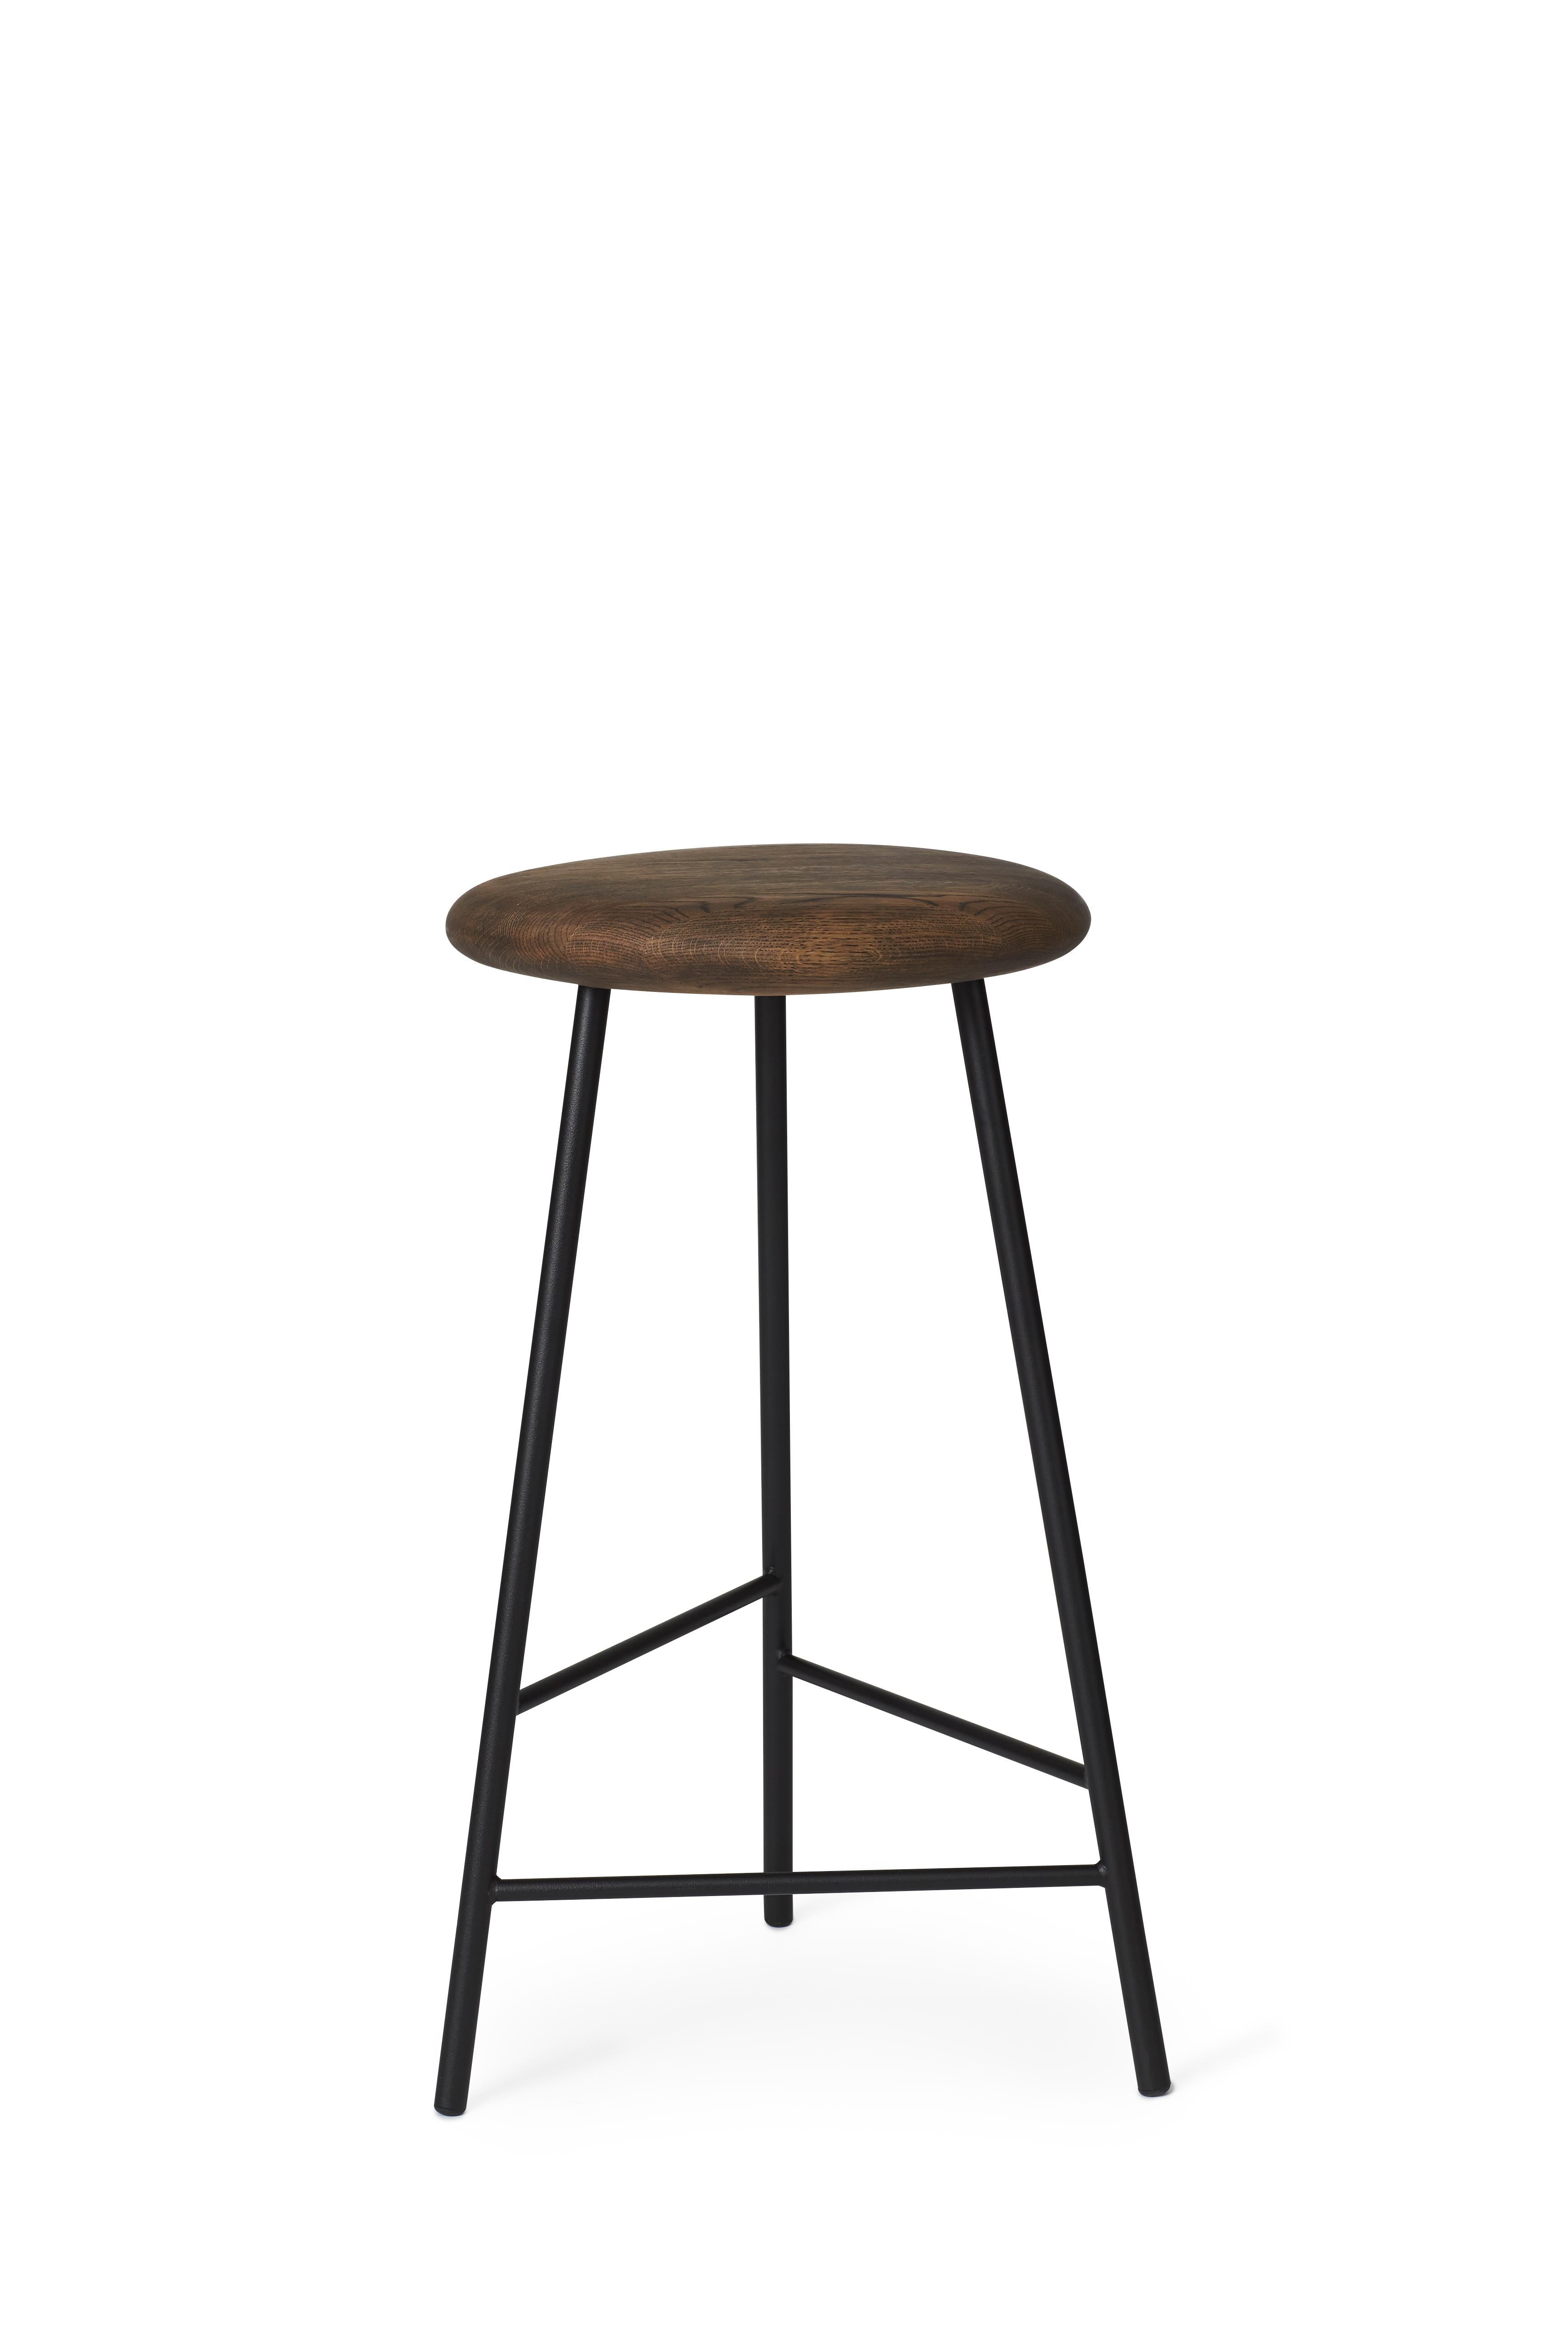 For Sale: Black (Smoked Oak/Black Noir) Pebble Counter Stool, by Welling / Ludvik from Warm Nordic